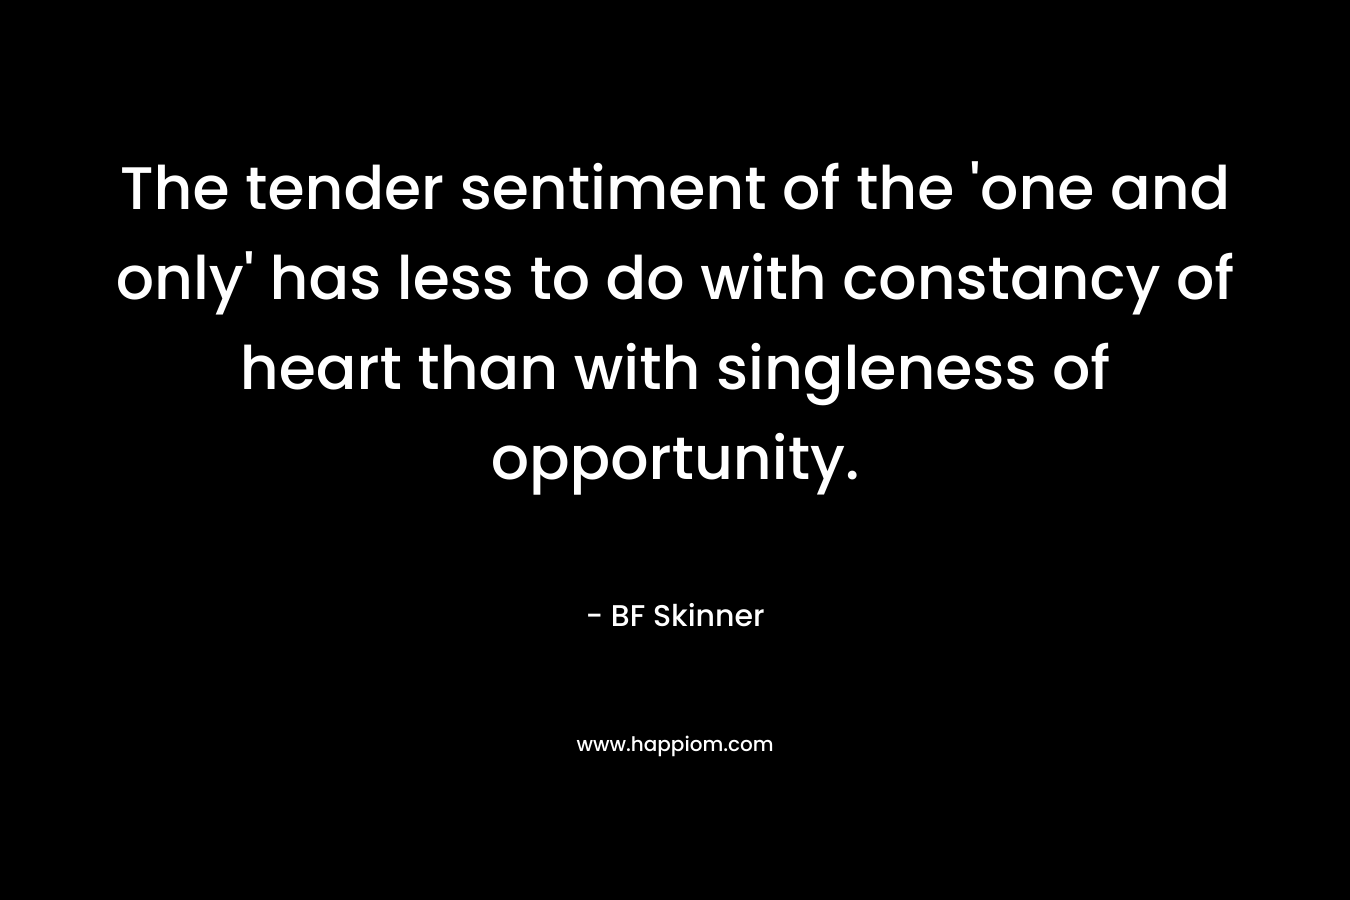 The tender sentiment of the ‘one and only’ has less to do with constancy of heart than with singleness of opportunity. – BF Skinner